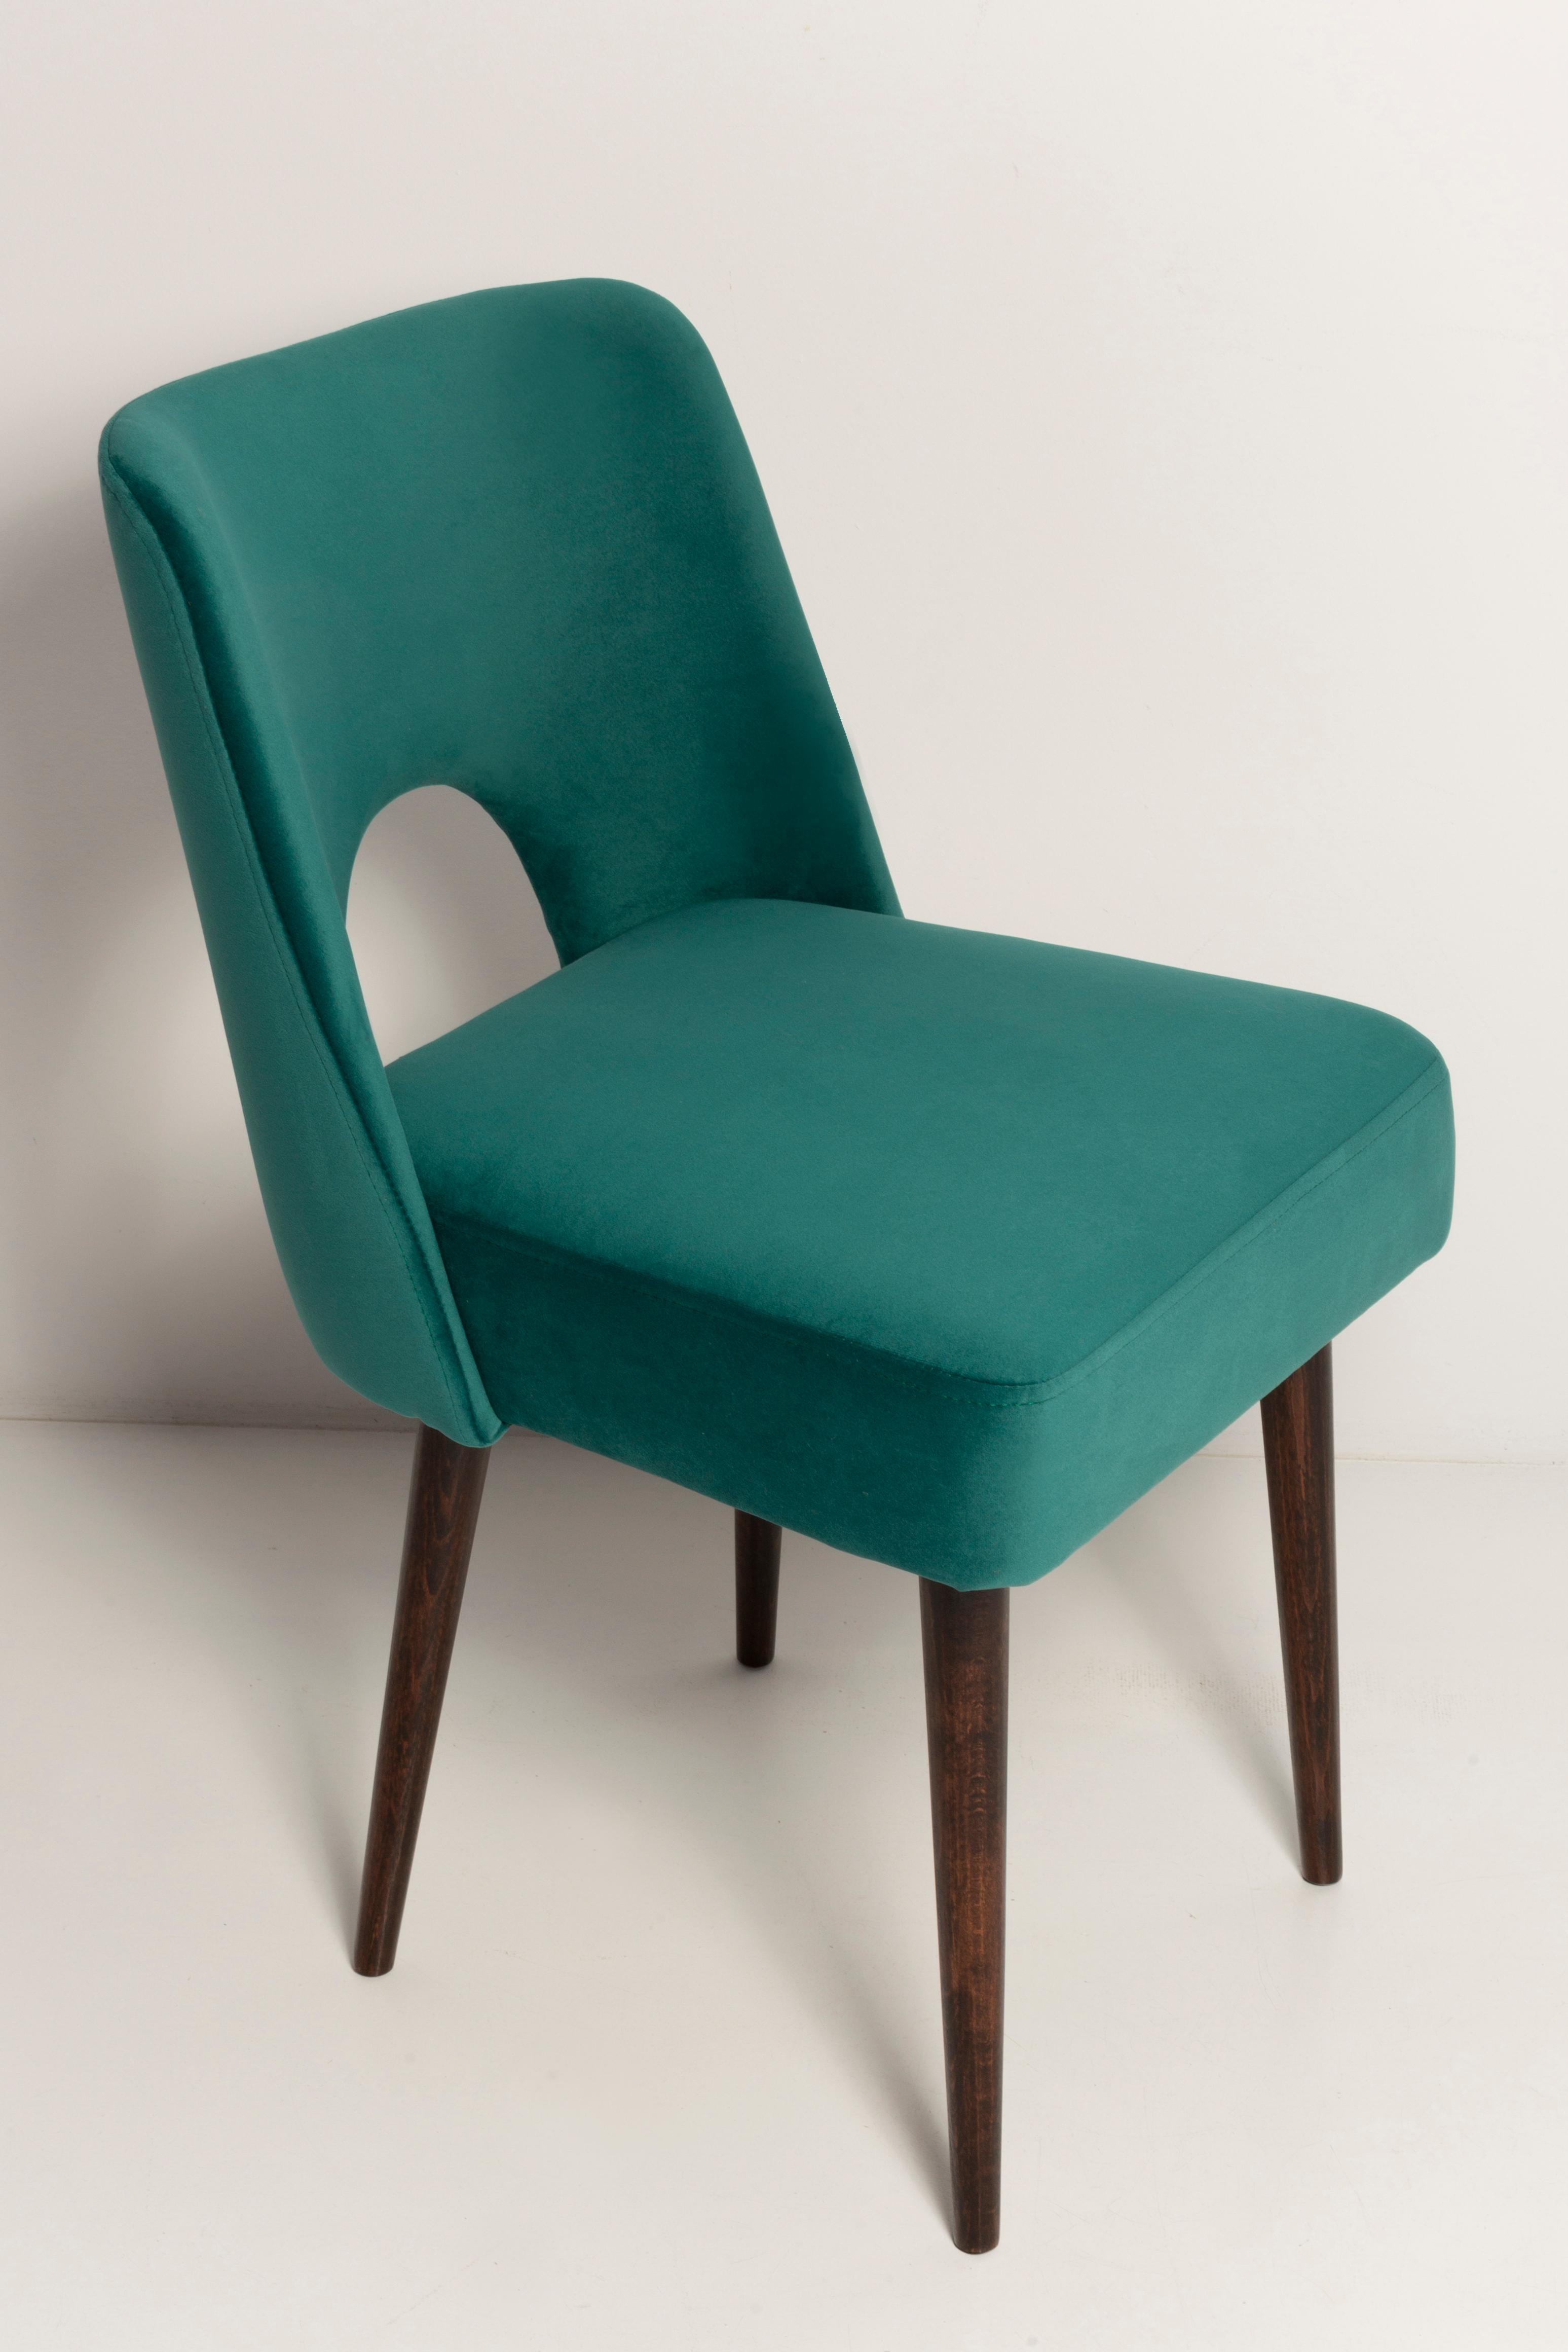 Beautiful chairs type 1020 colloquially called 